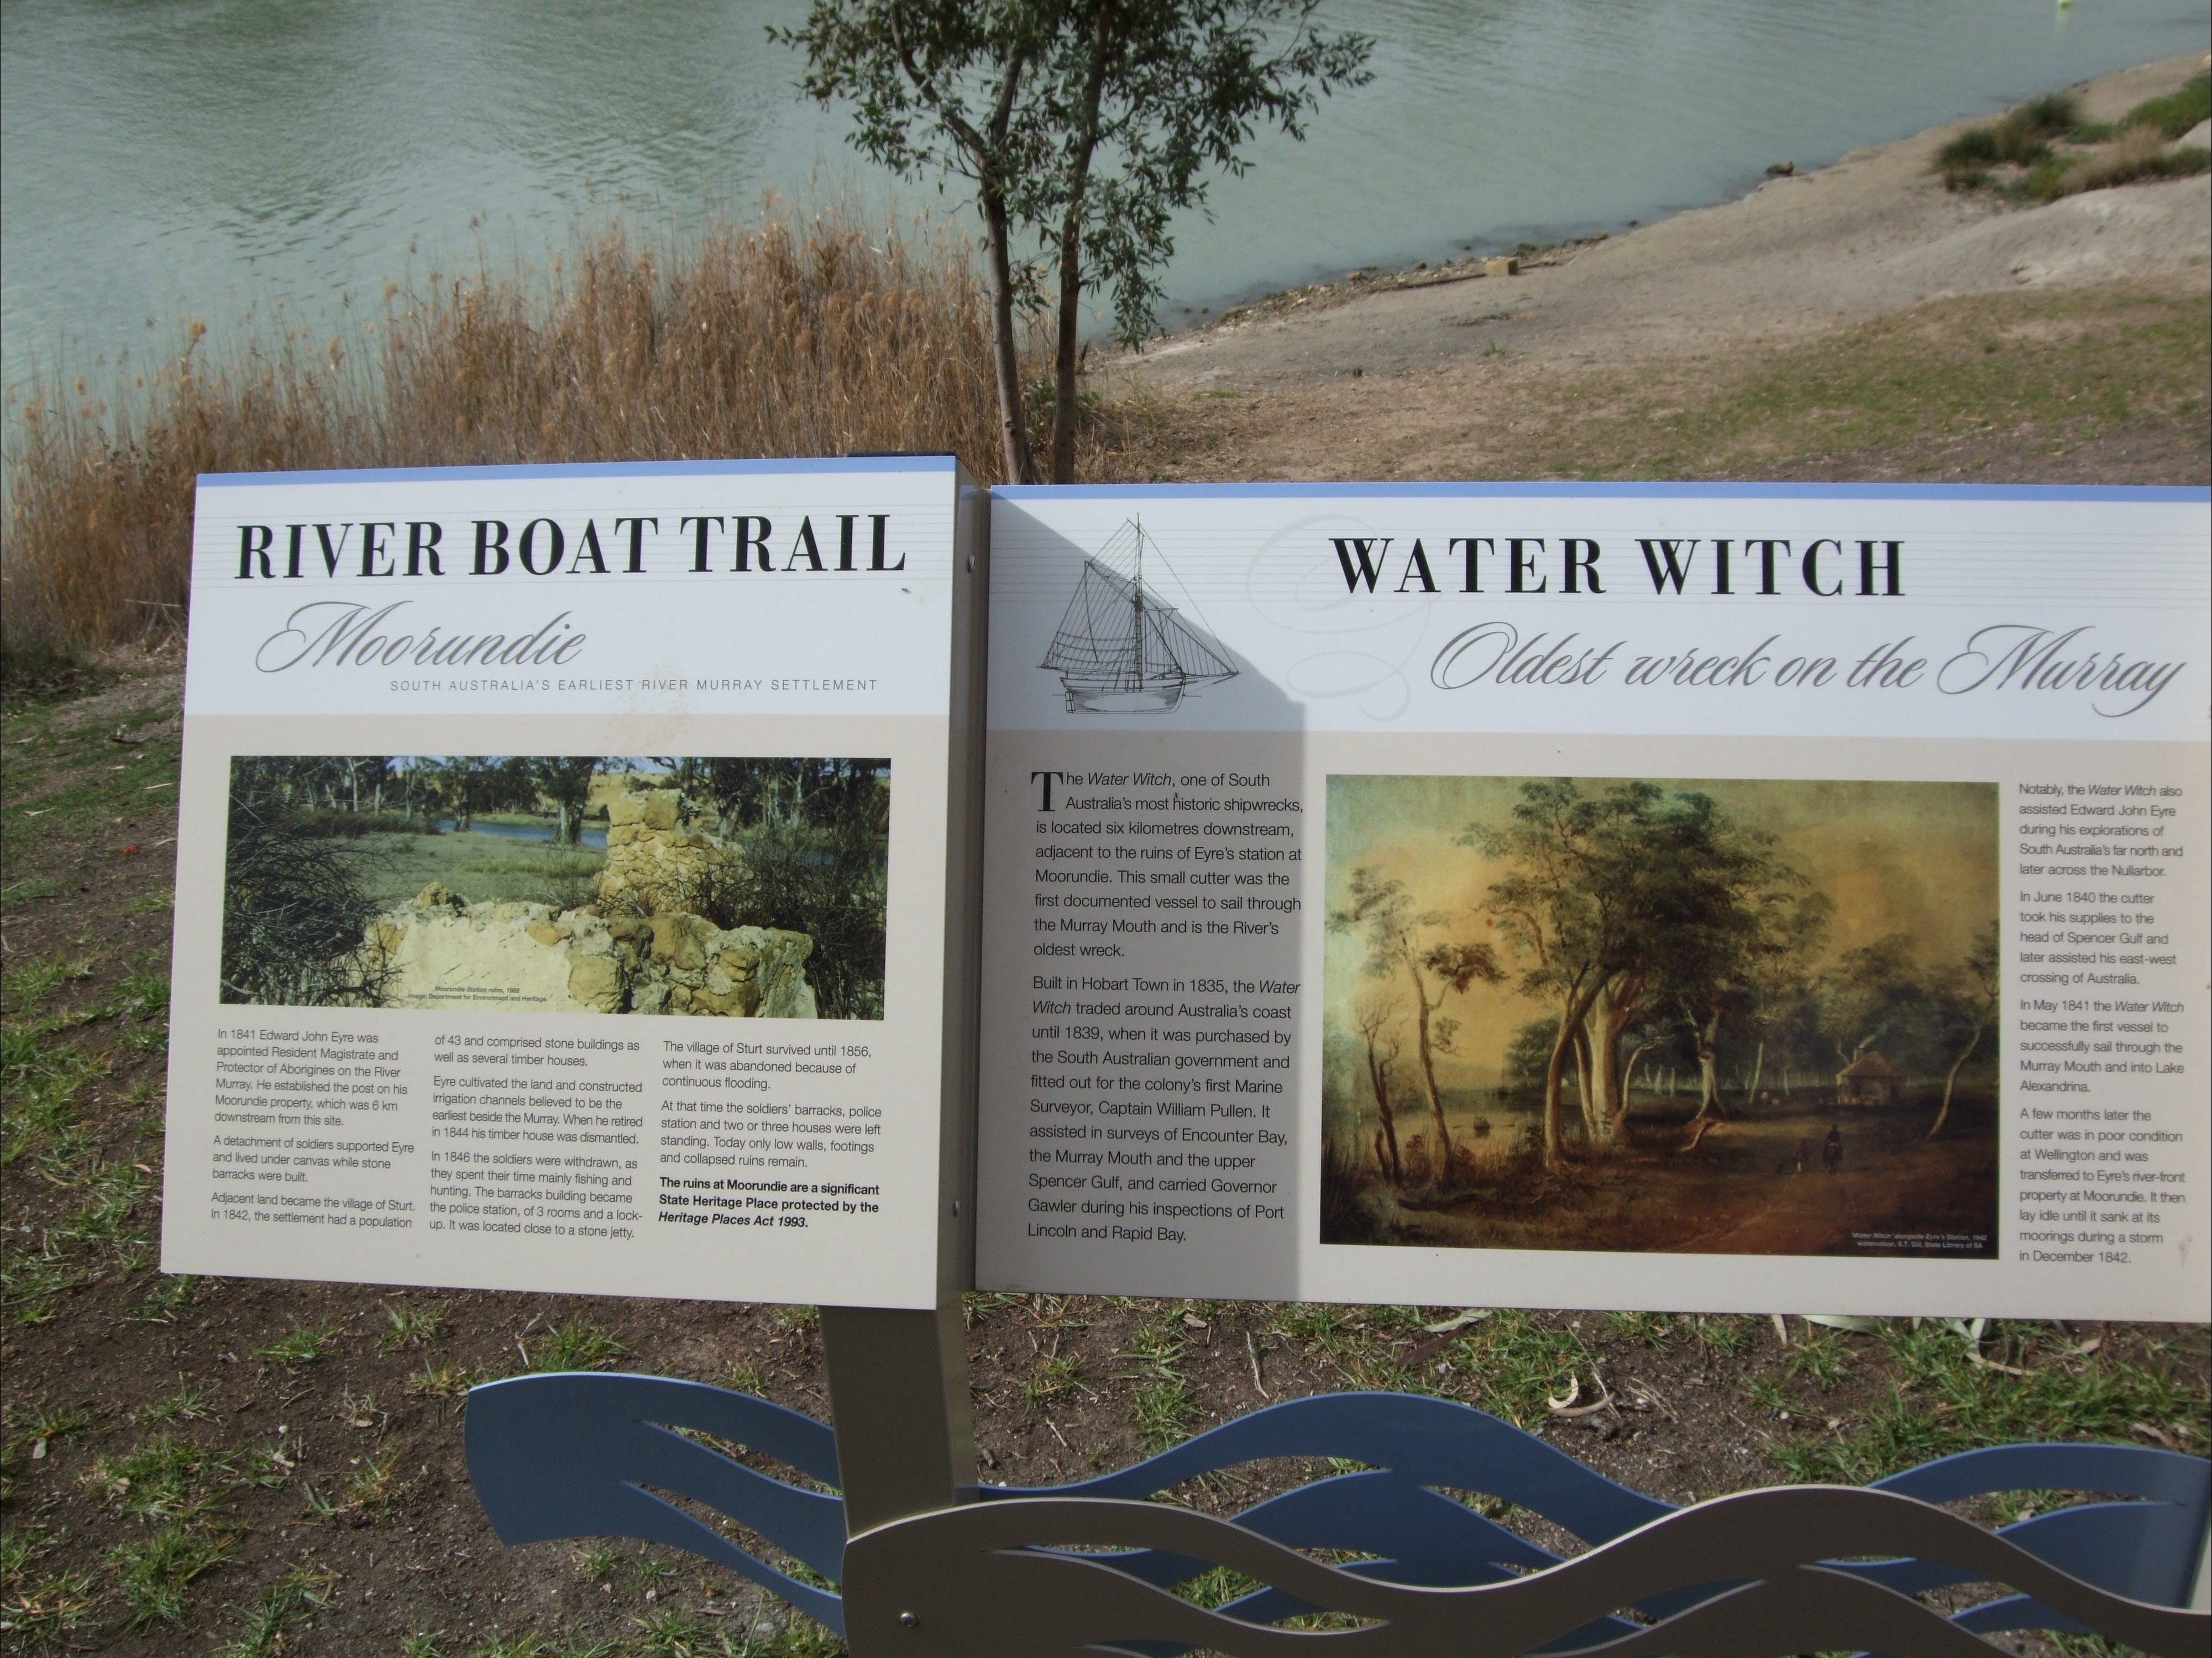 River Boat Trail - Attractions